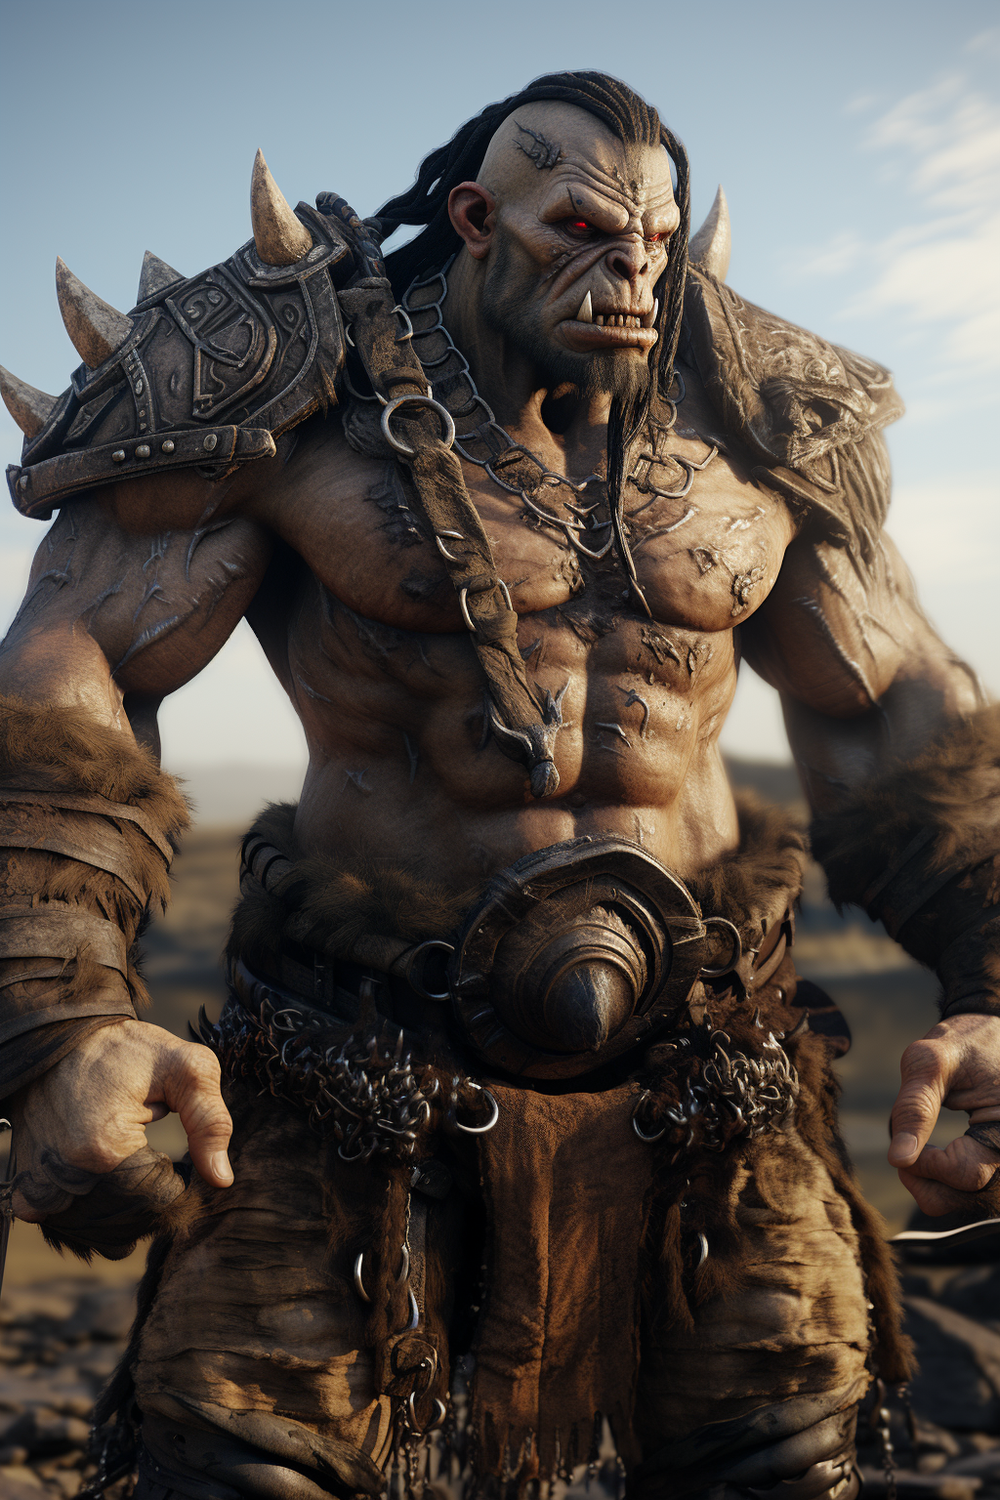 orestis_giant_orc_warrior_unreal_engine_voodoo_magic_uhd_Eclect_ab3fa757-5889-45fe-8781-cde1f744288e.png